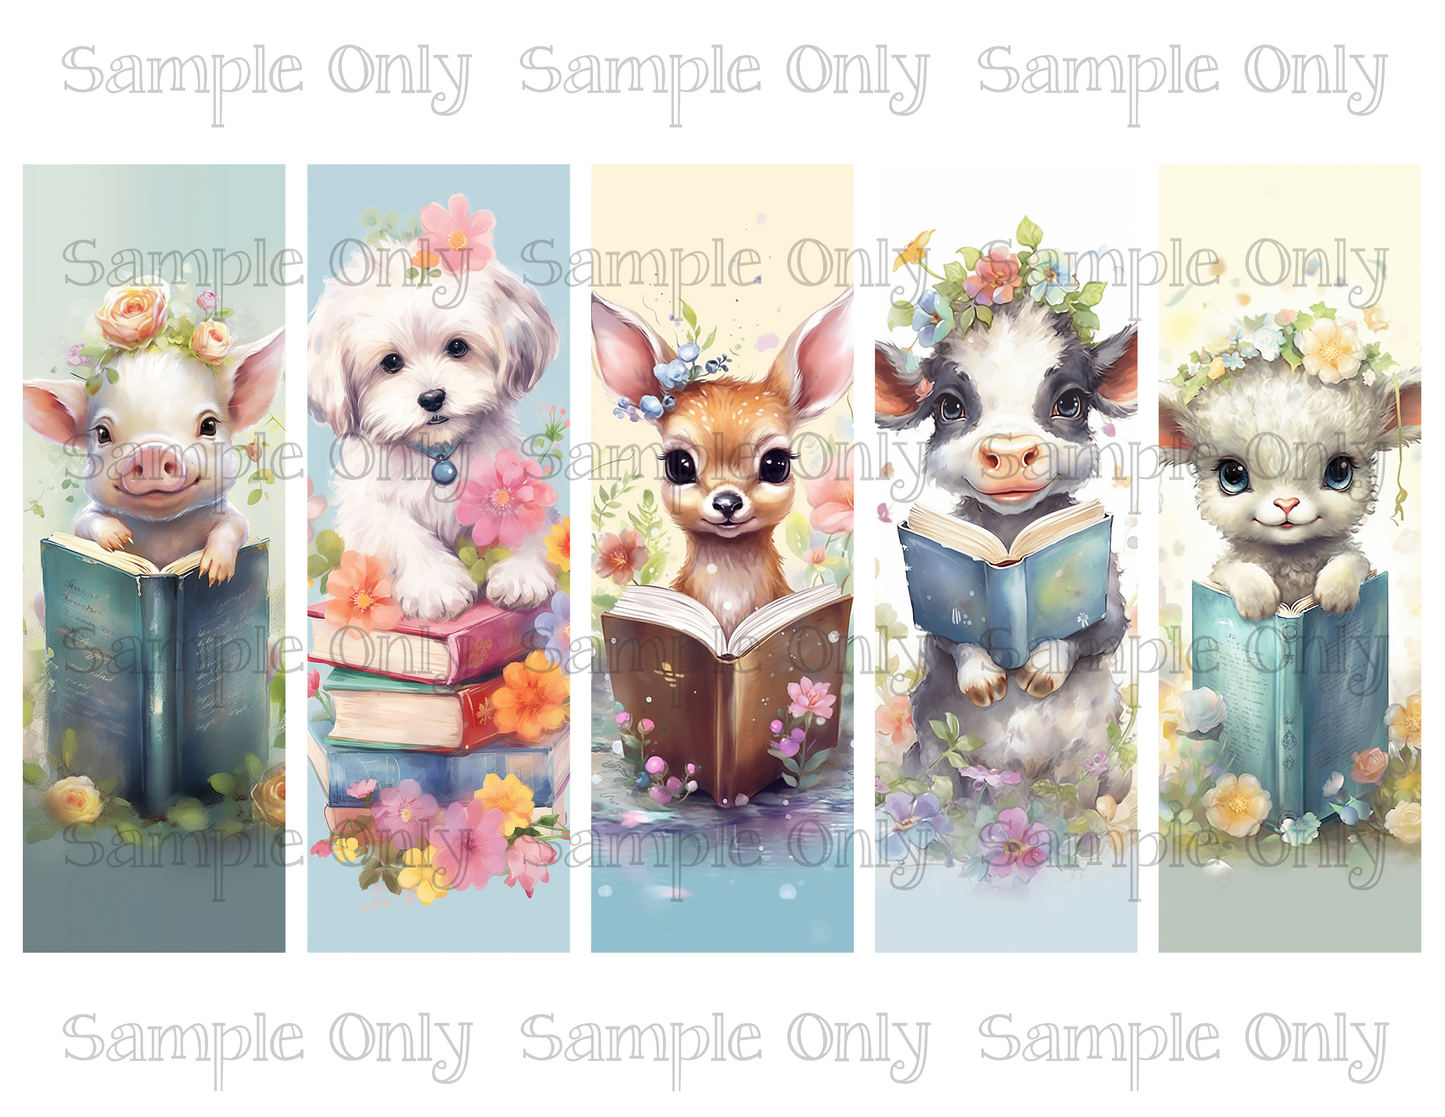 Animals With Books Bookmark Set 01 Printed Water Soluble Image Transfer Sheet For Polymer Clay